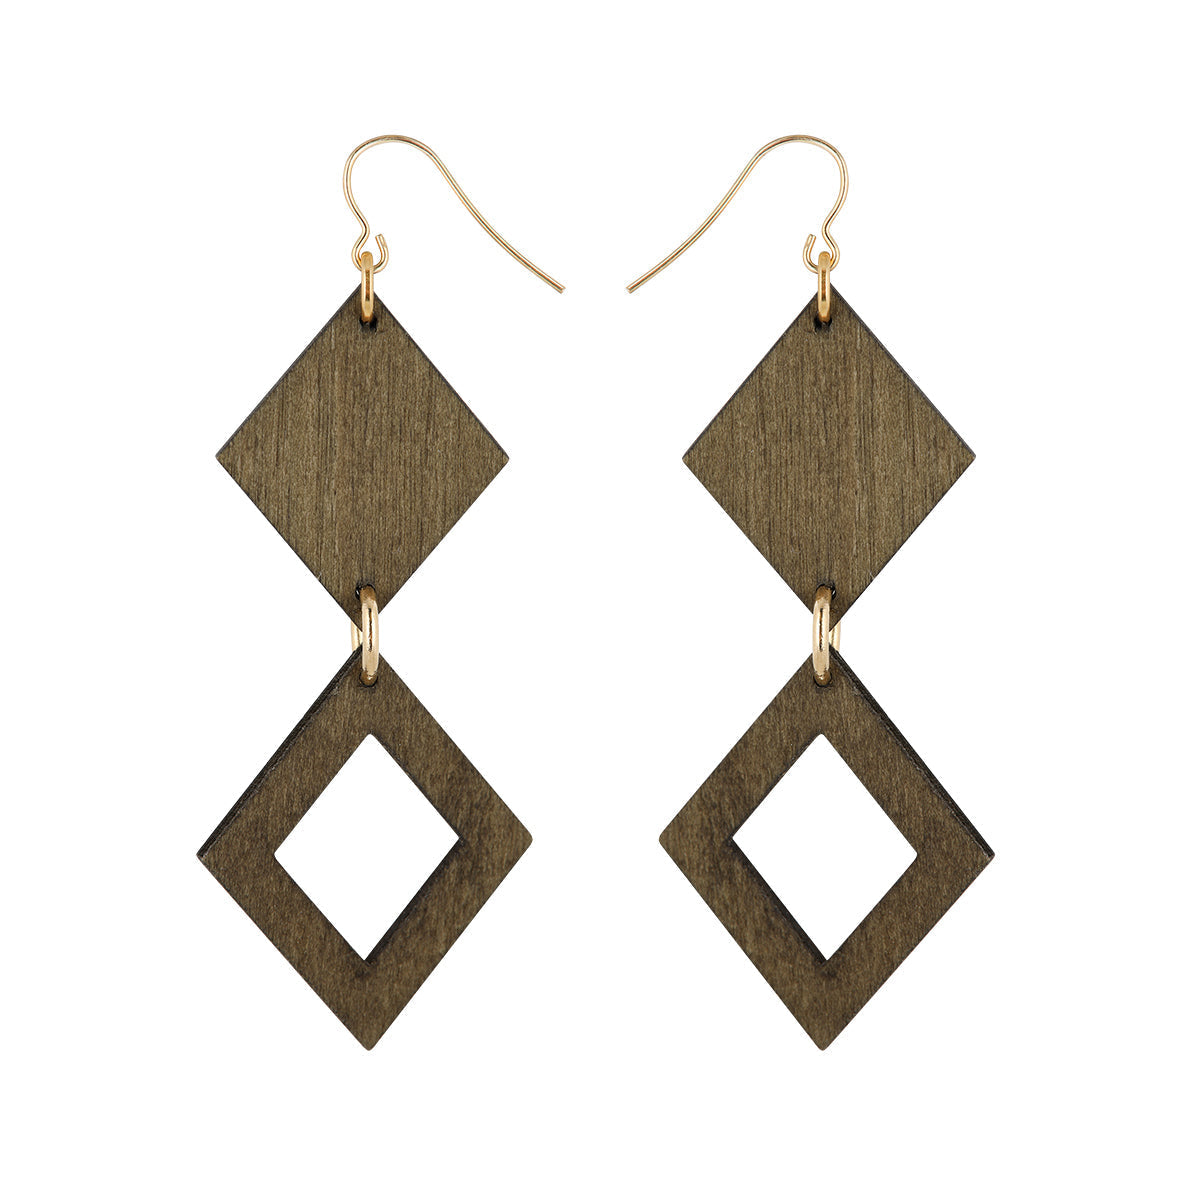 Triangeli earrings, green and gold